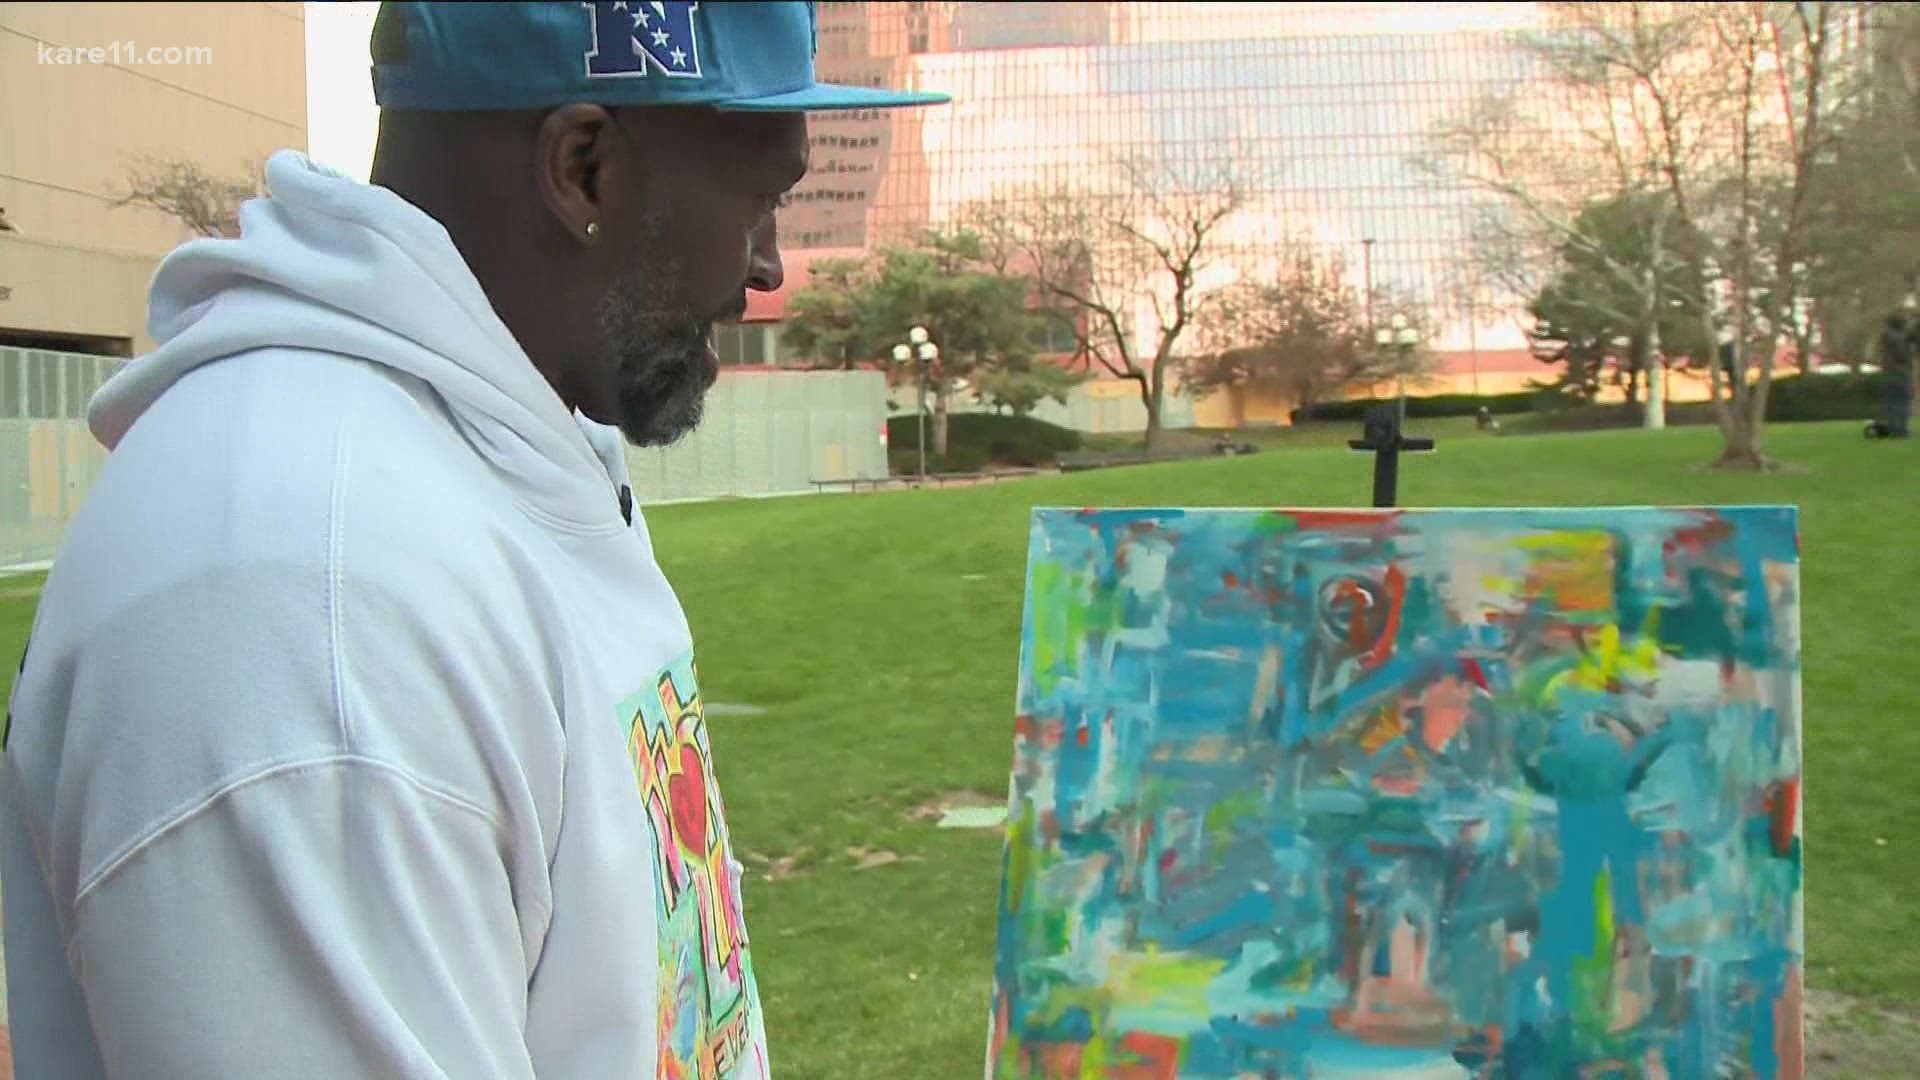 Black artist, Sean Garrison, painted a piece of art outside the courthouse during Tuesday's Derek Chauvin verdict